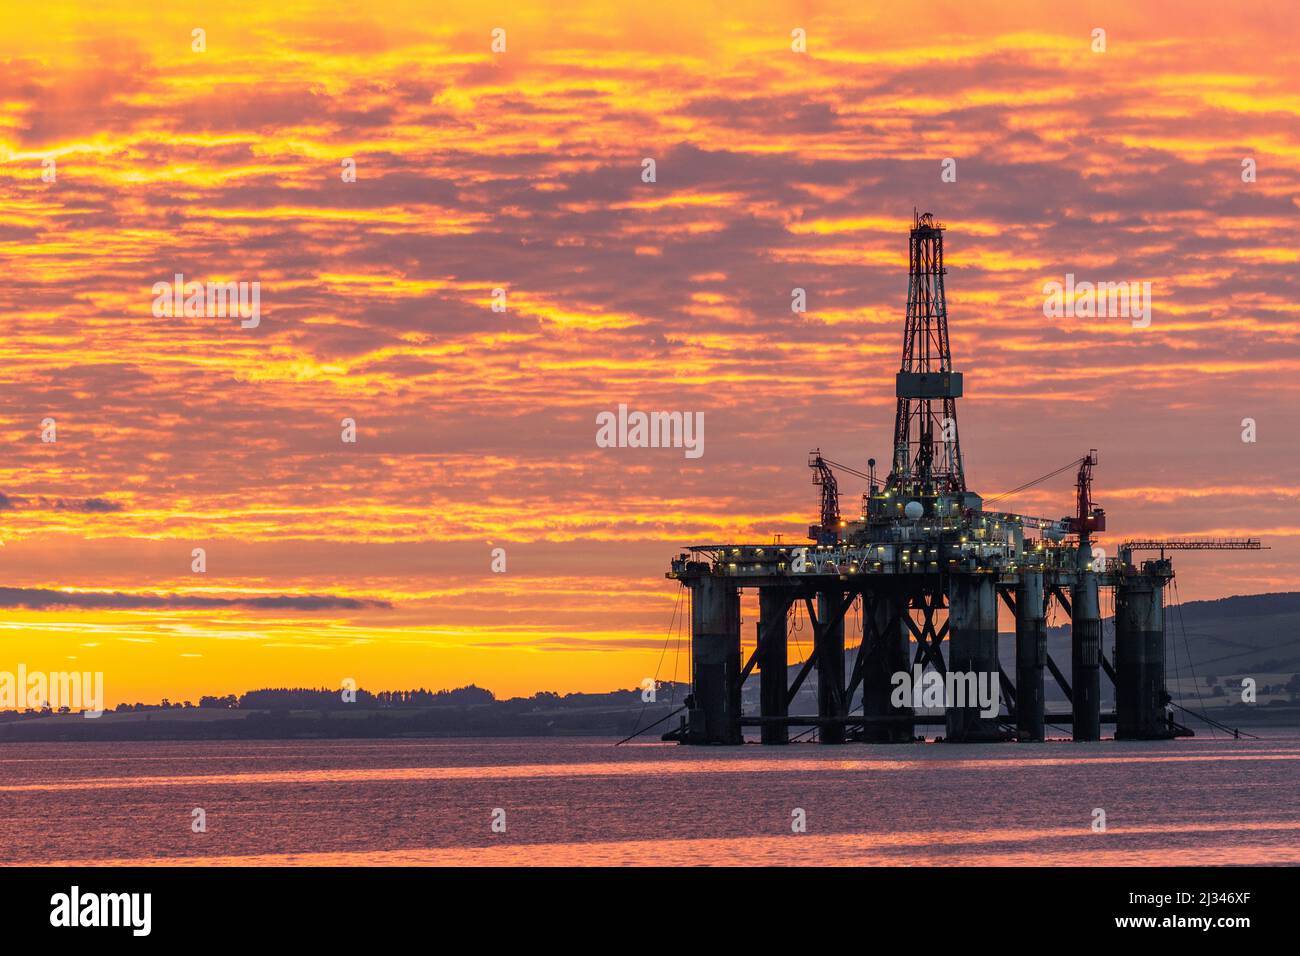 Oil rigs, drilling platforms in maintenance, Cromarty Firth, Scotland UK Stock Photo